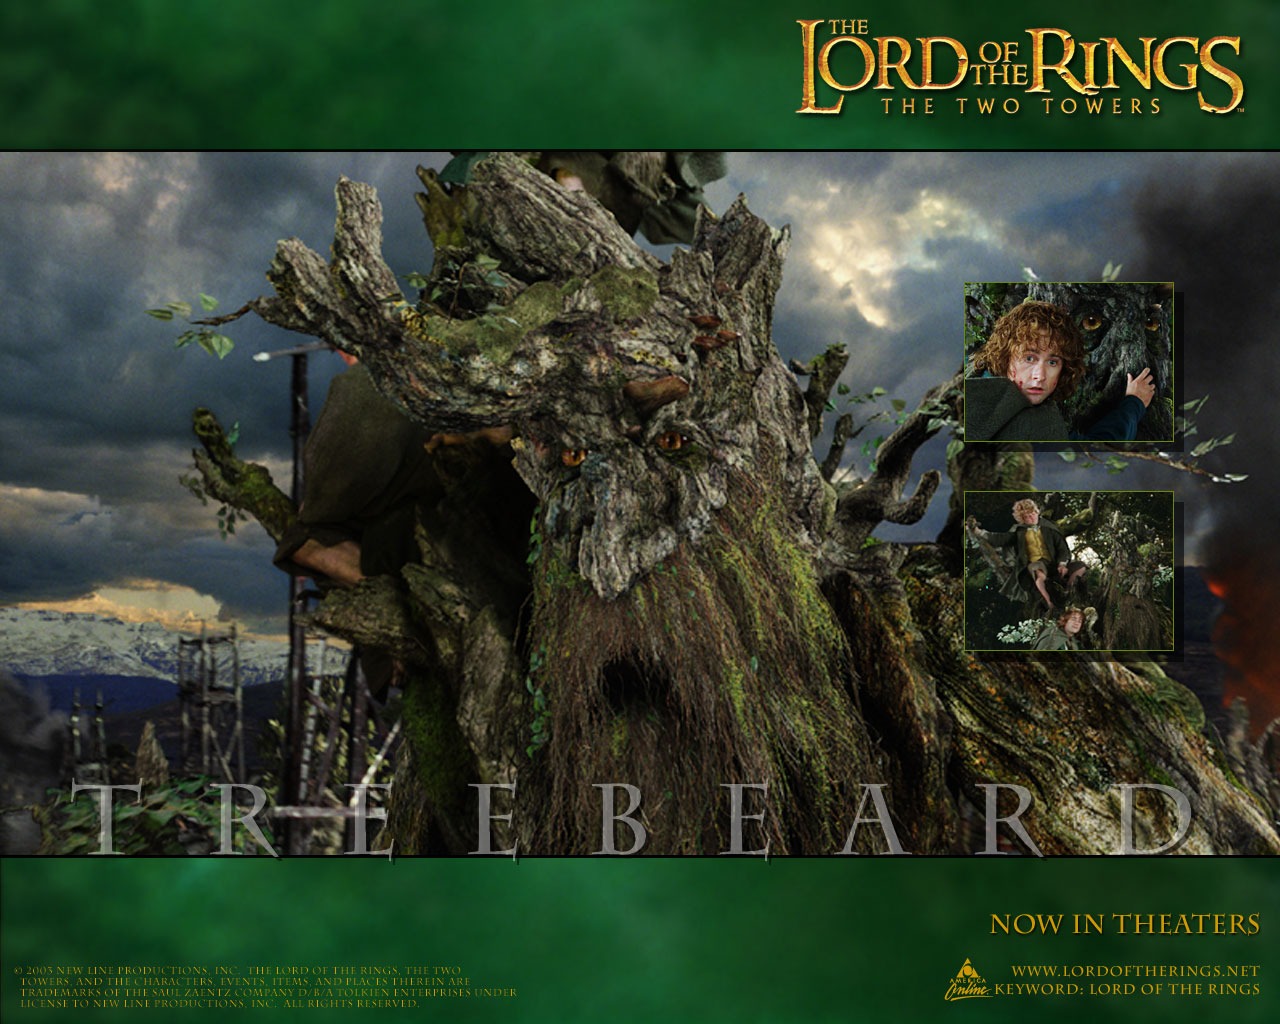 The Lord of the Rings wallpaper #11 - 1280x1024